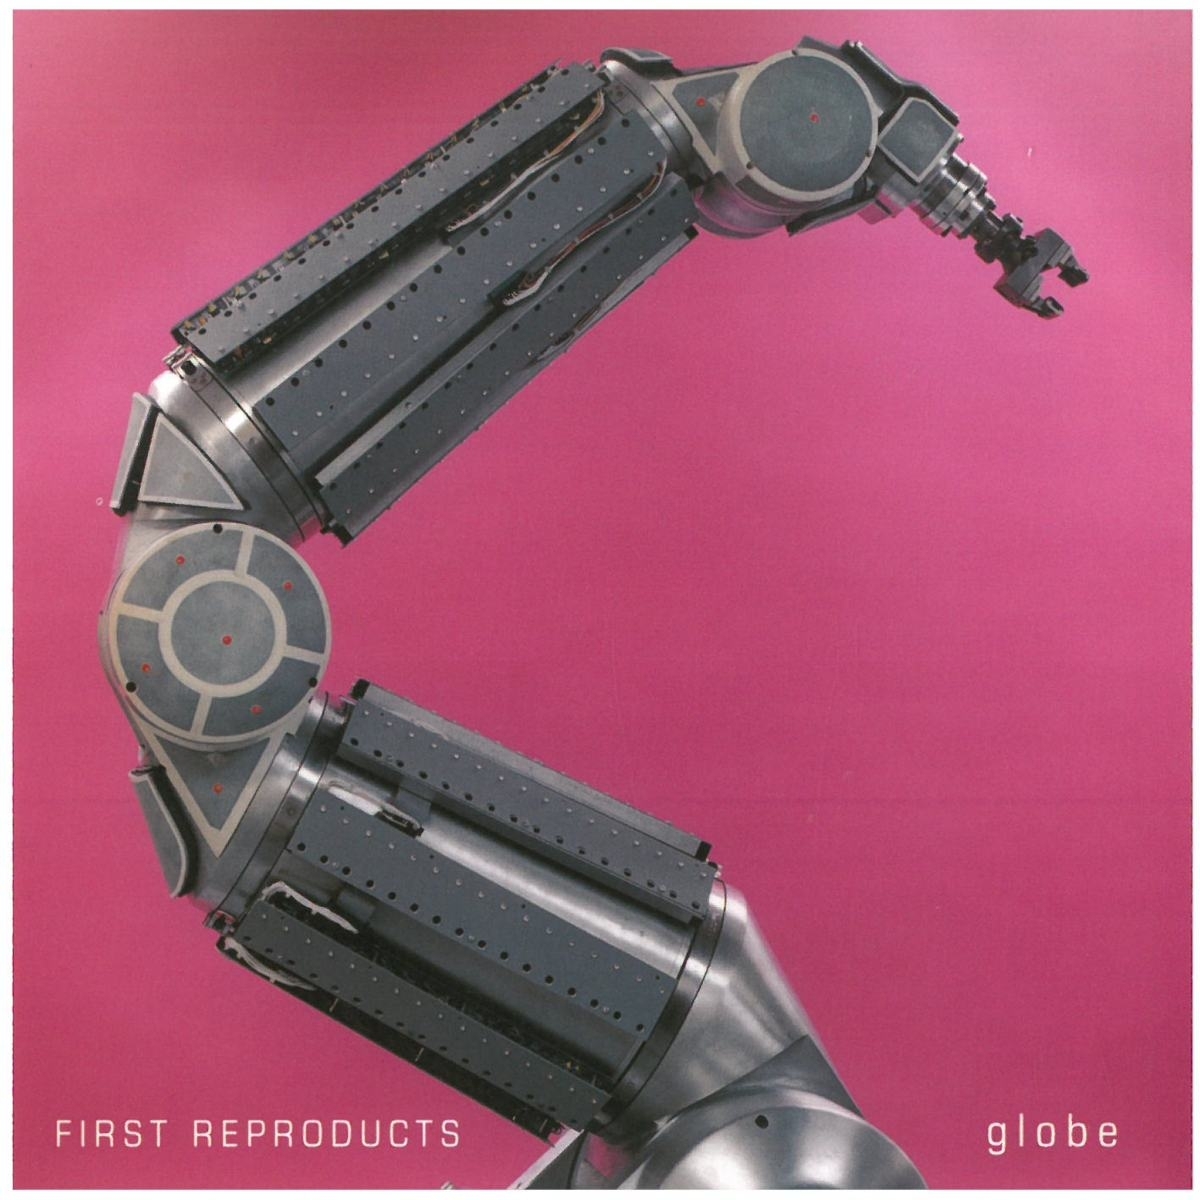 globe(グローブ) / FIRST REPRODUCTS CD_画像1